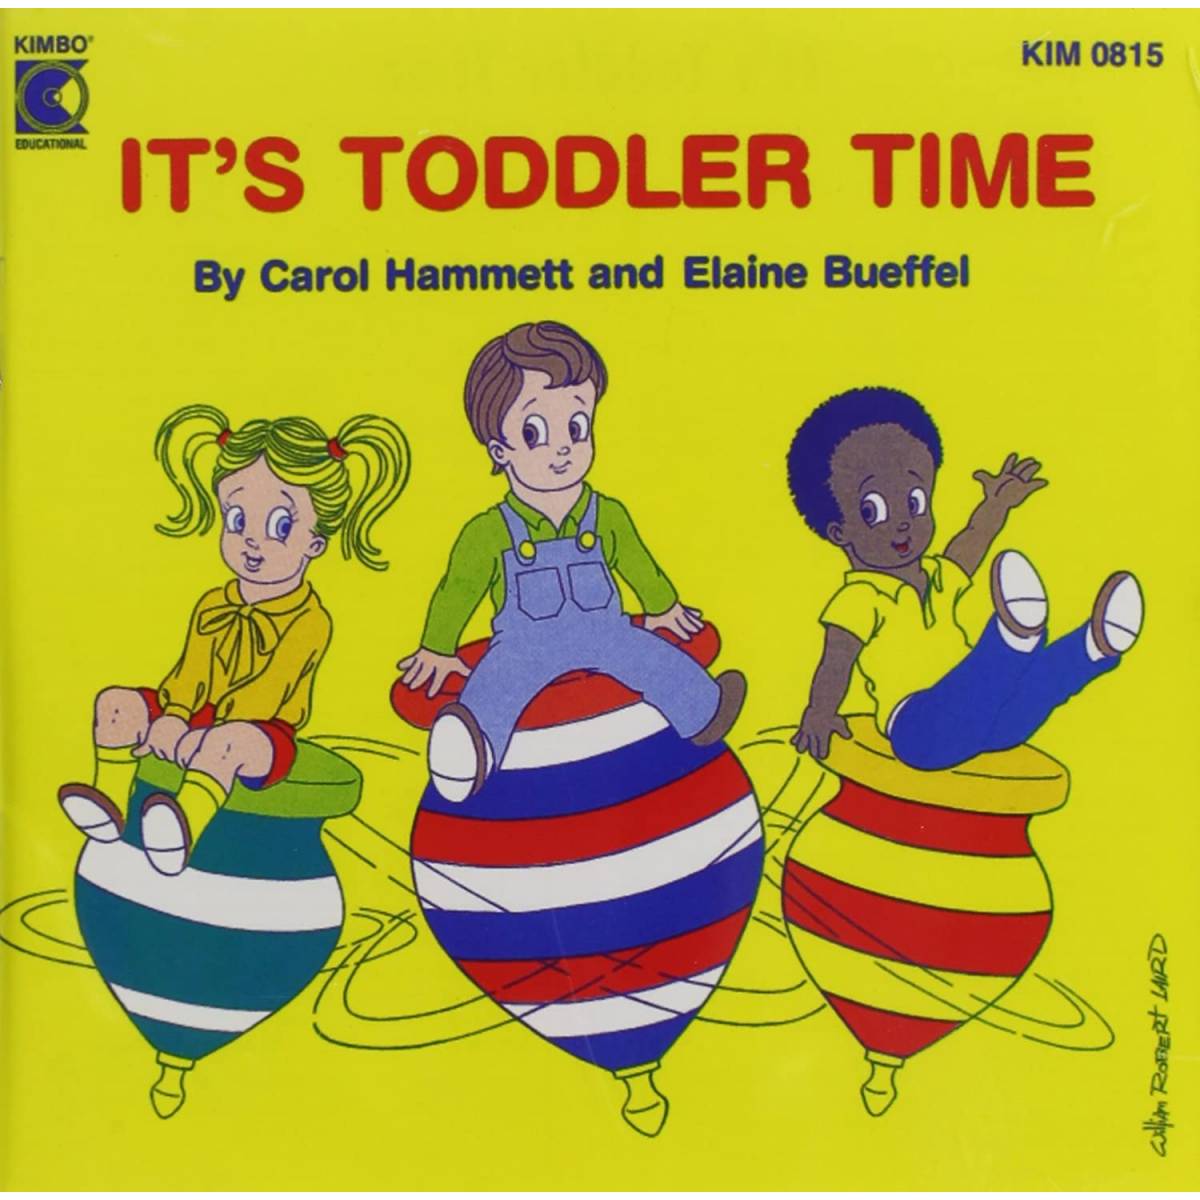 It's Toddler Time